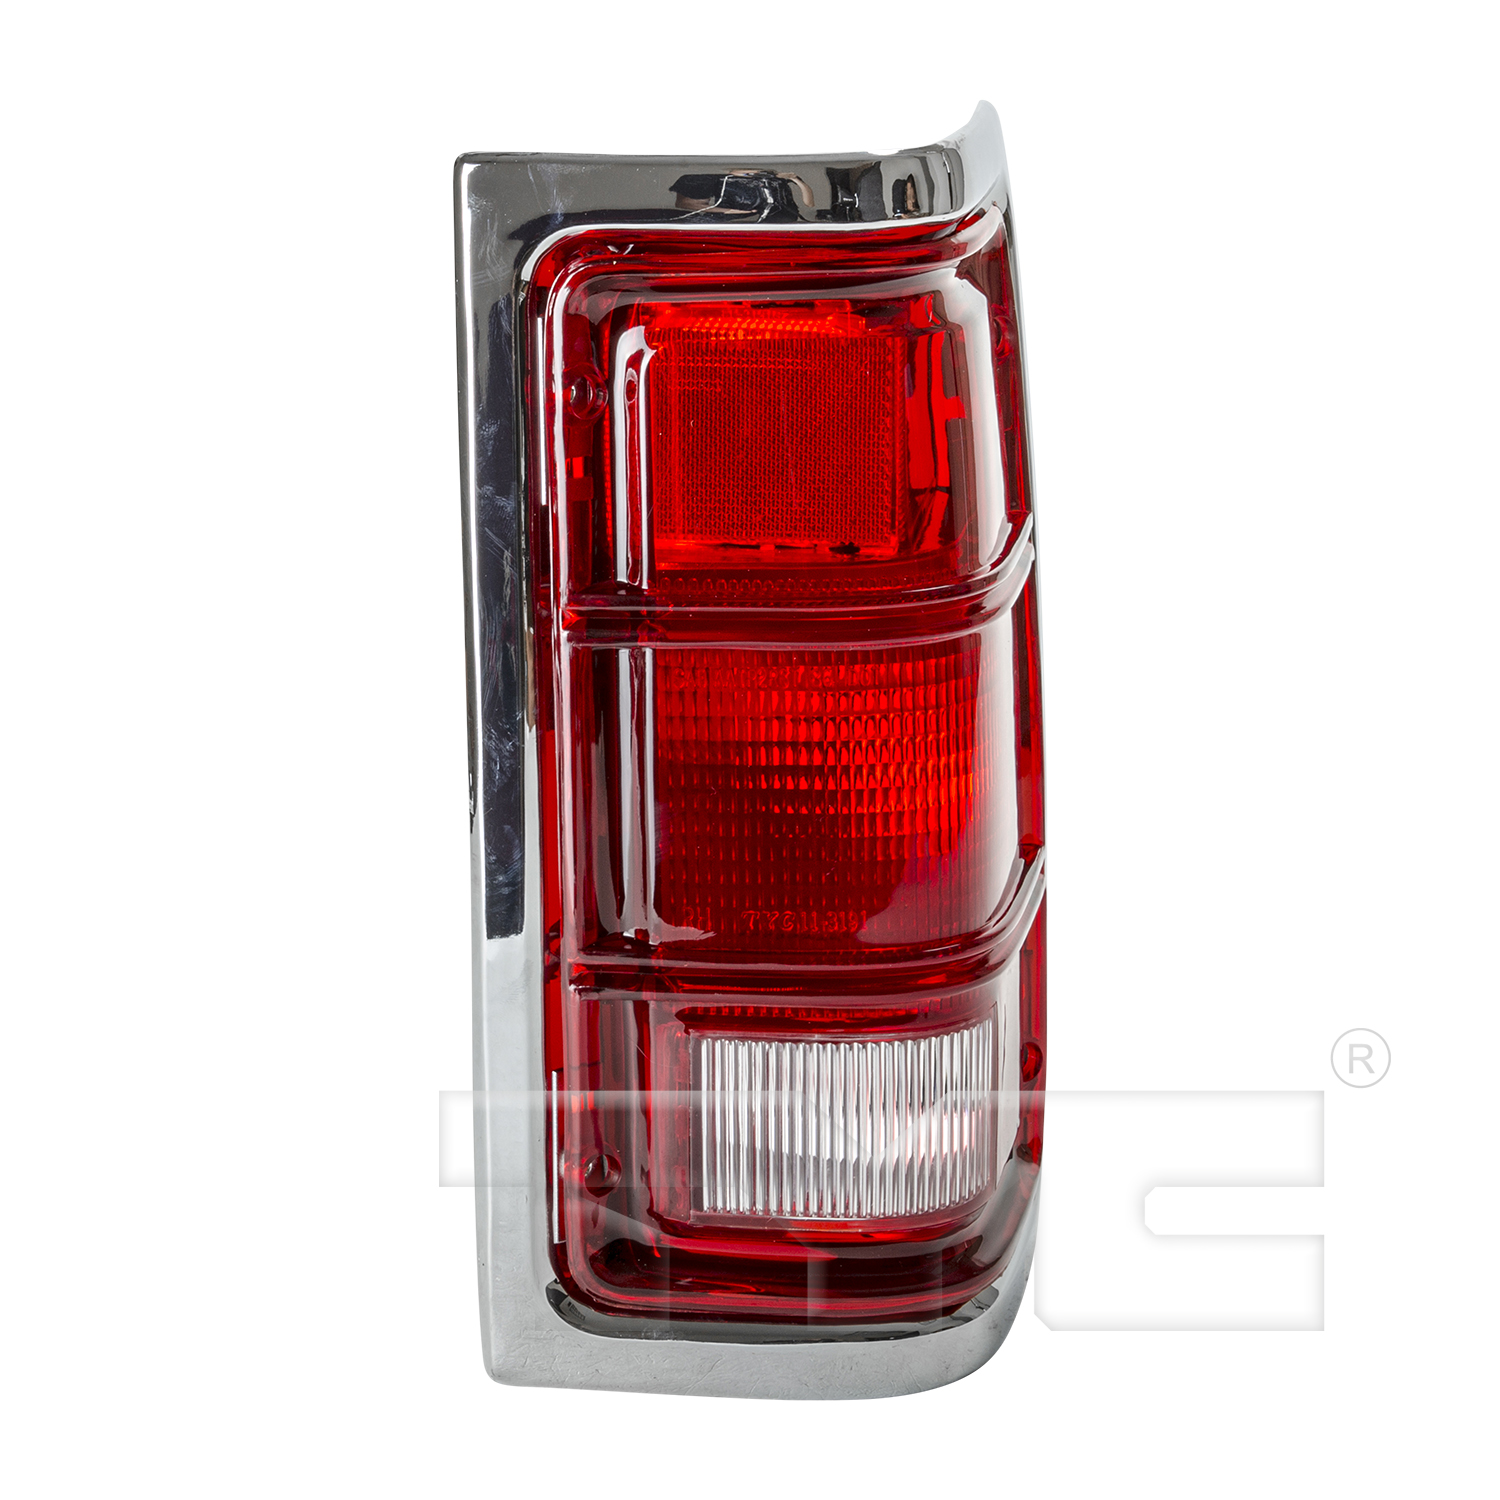 Aftermarket TAILLIGHTS for DODGE - W350, W350,92-93,RT Taillamp lens